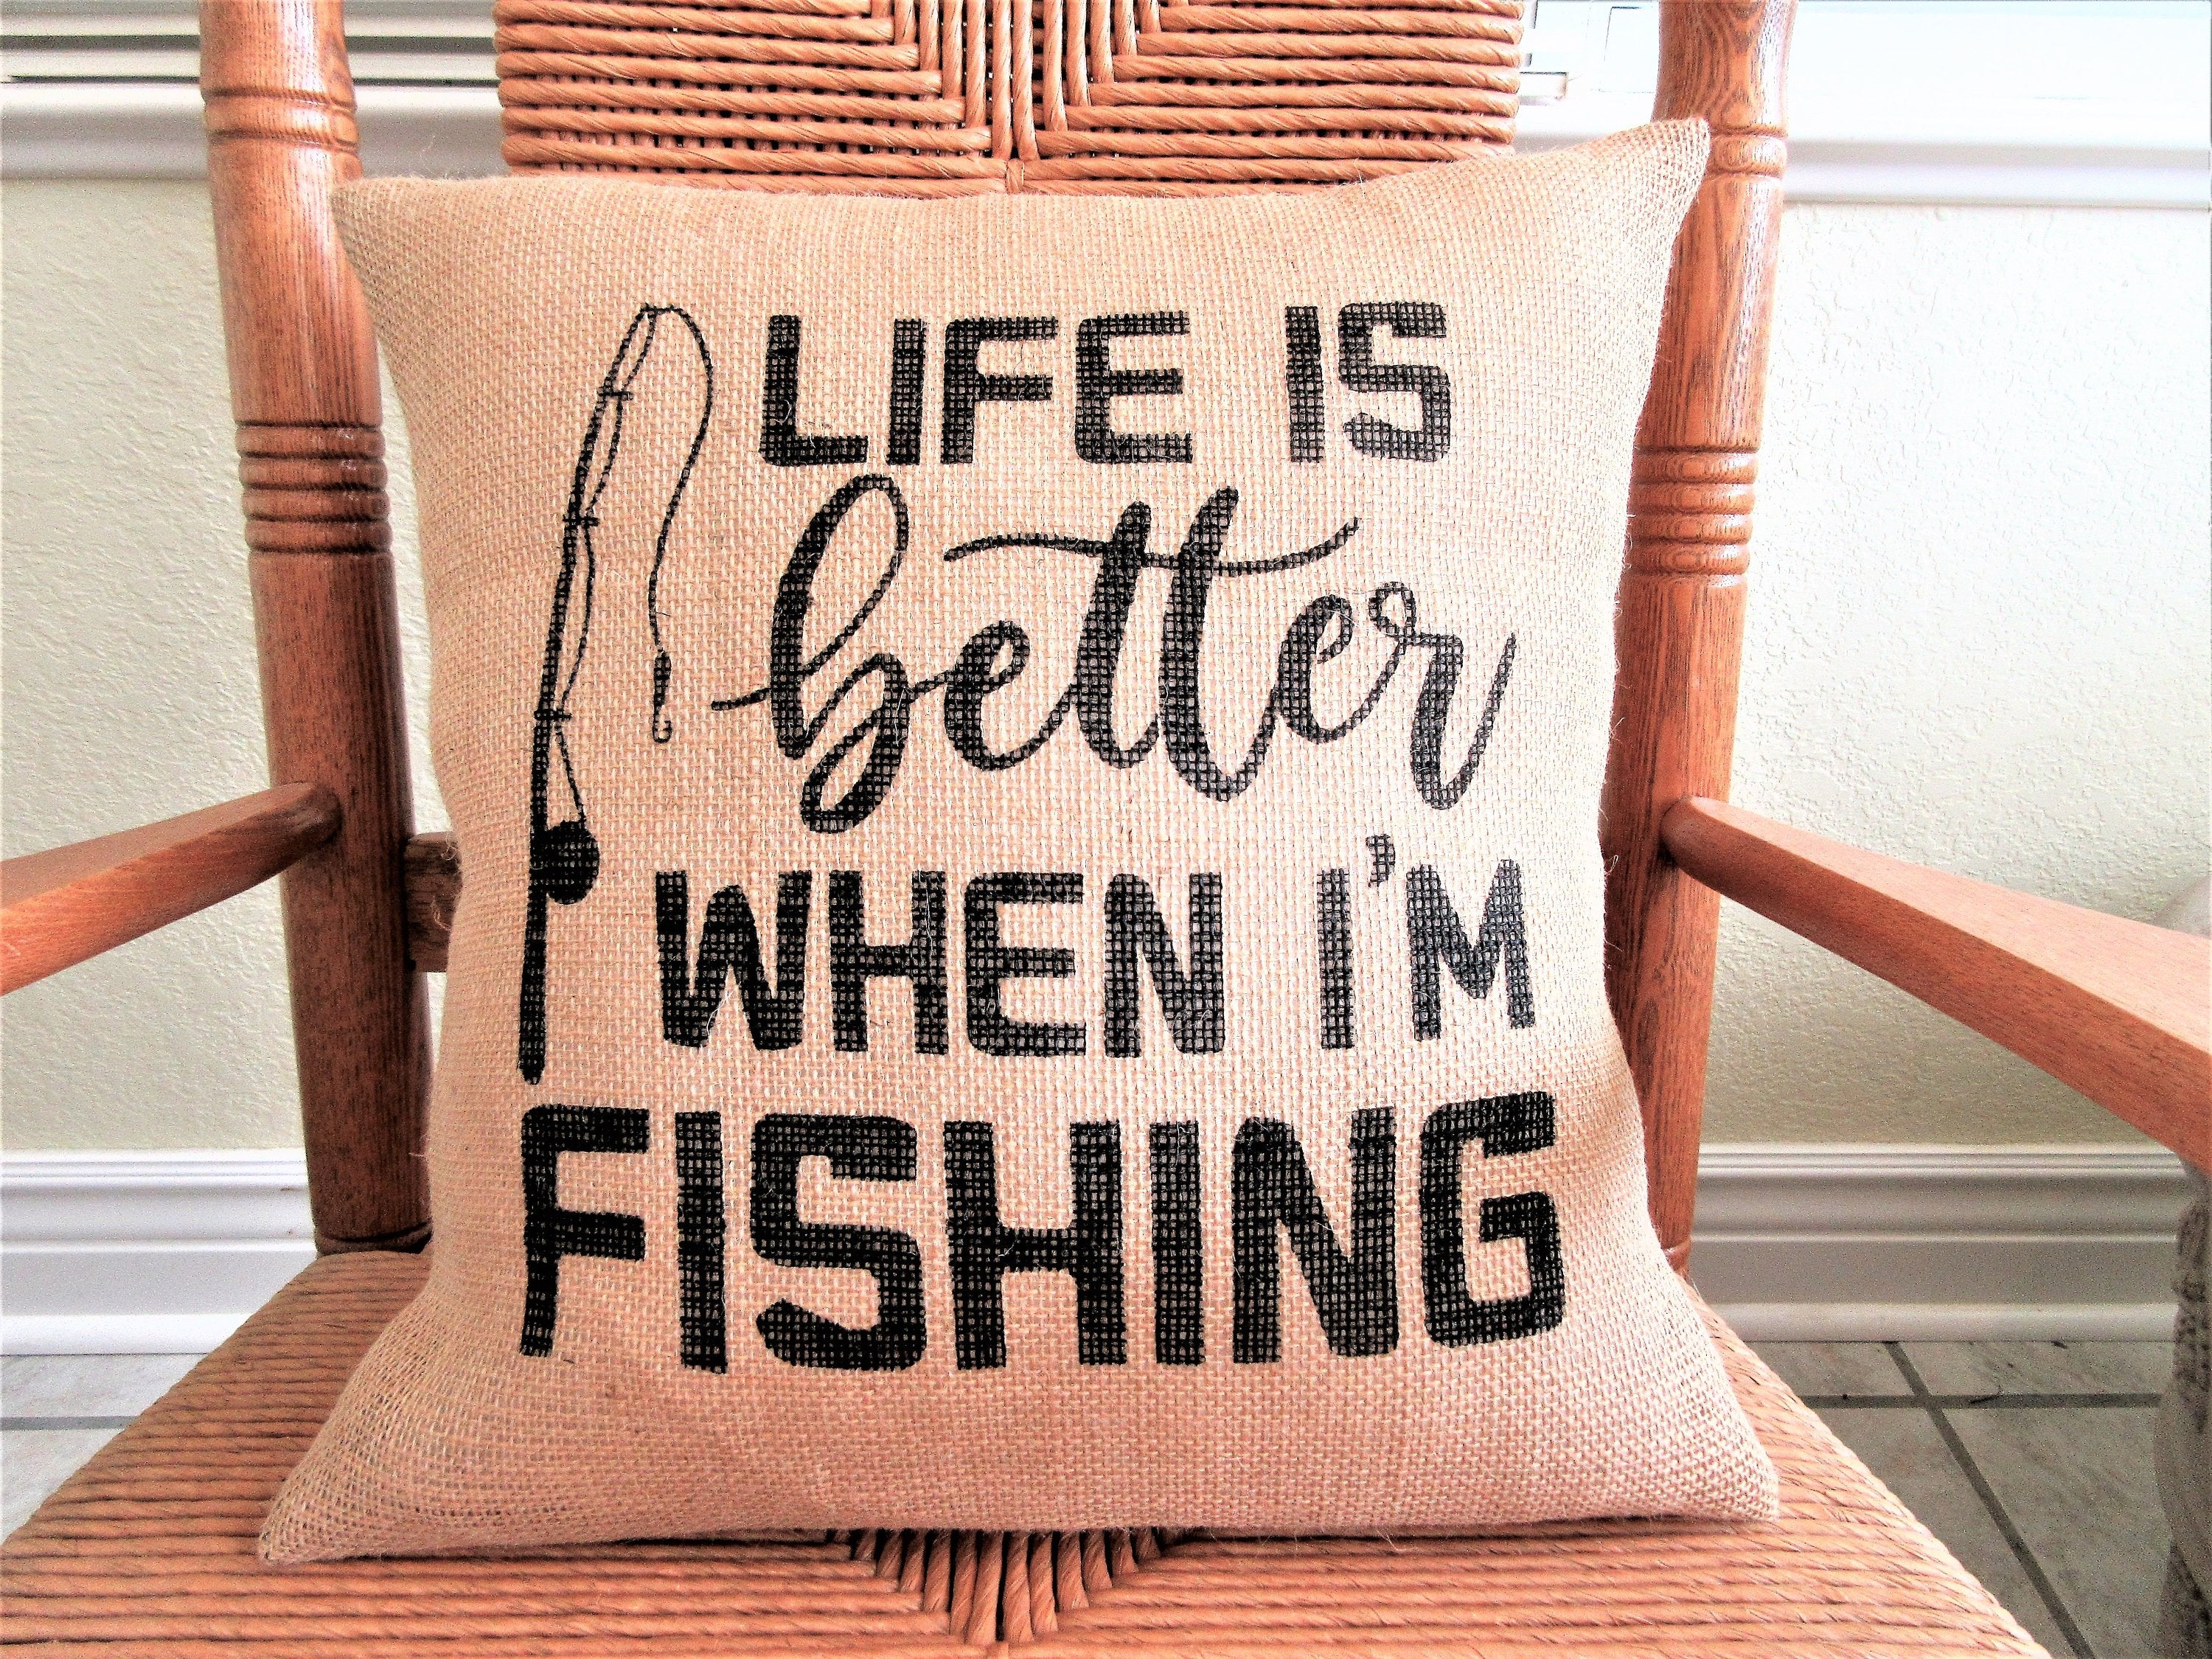 Life is better when I'm fishing Burlap pillow